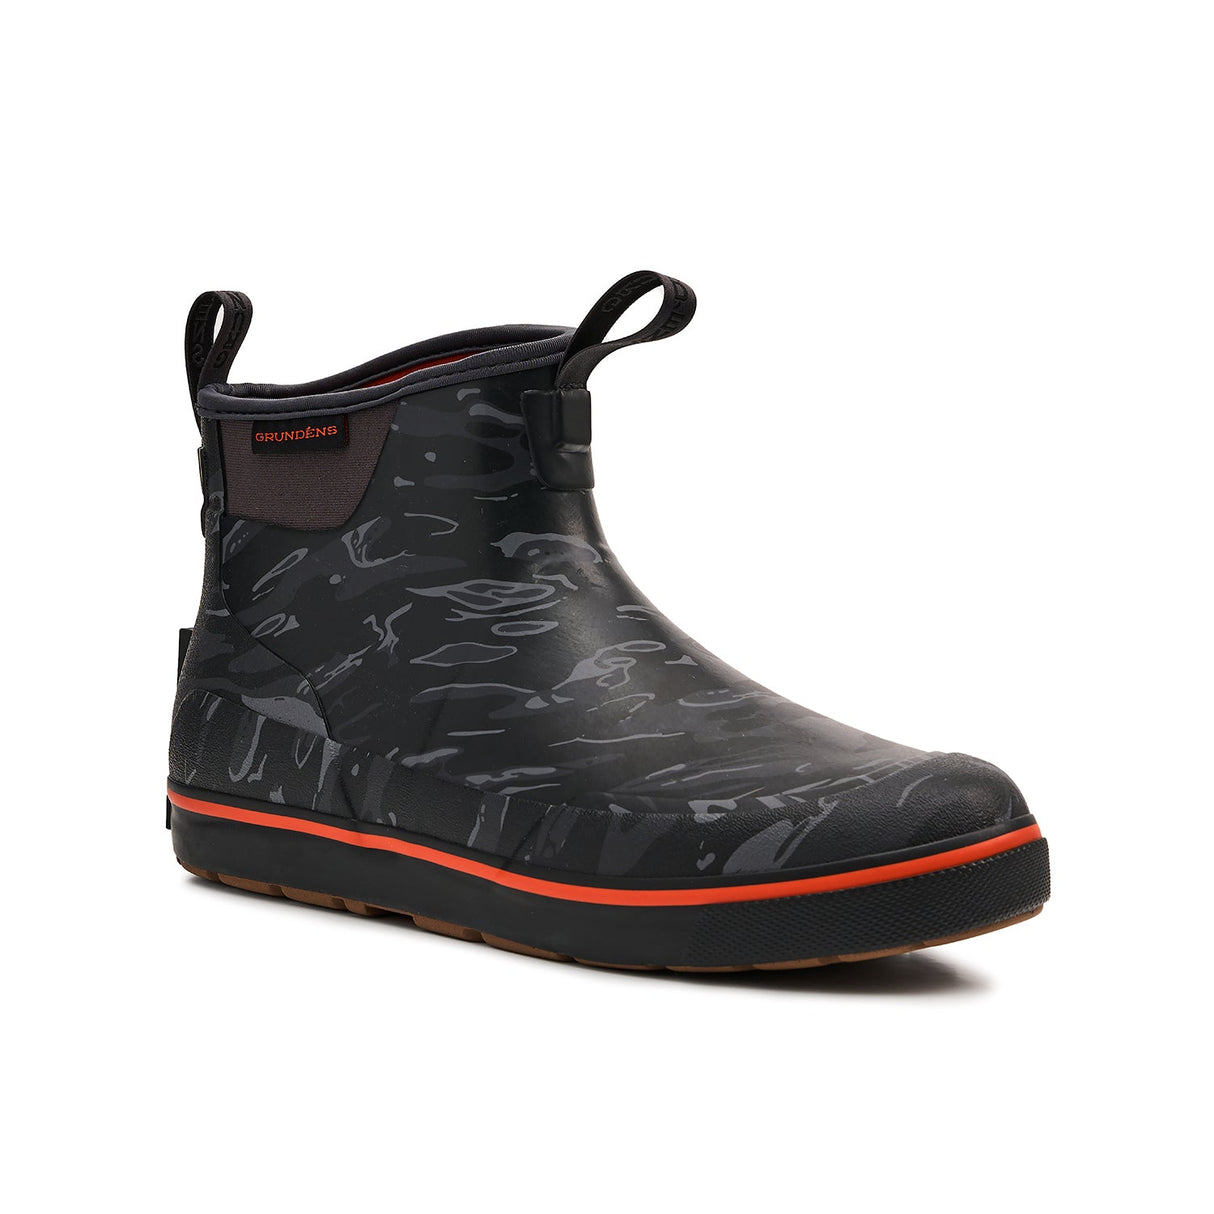 GRUNDENS DECK-BOSS 6" ANKLE BOOT